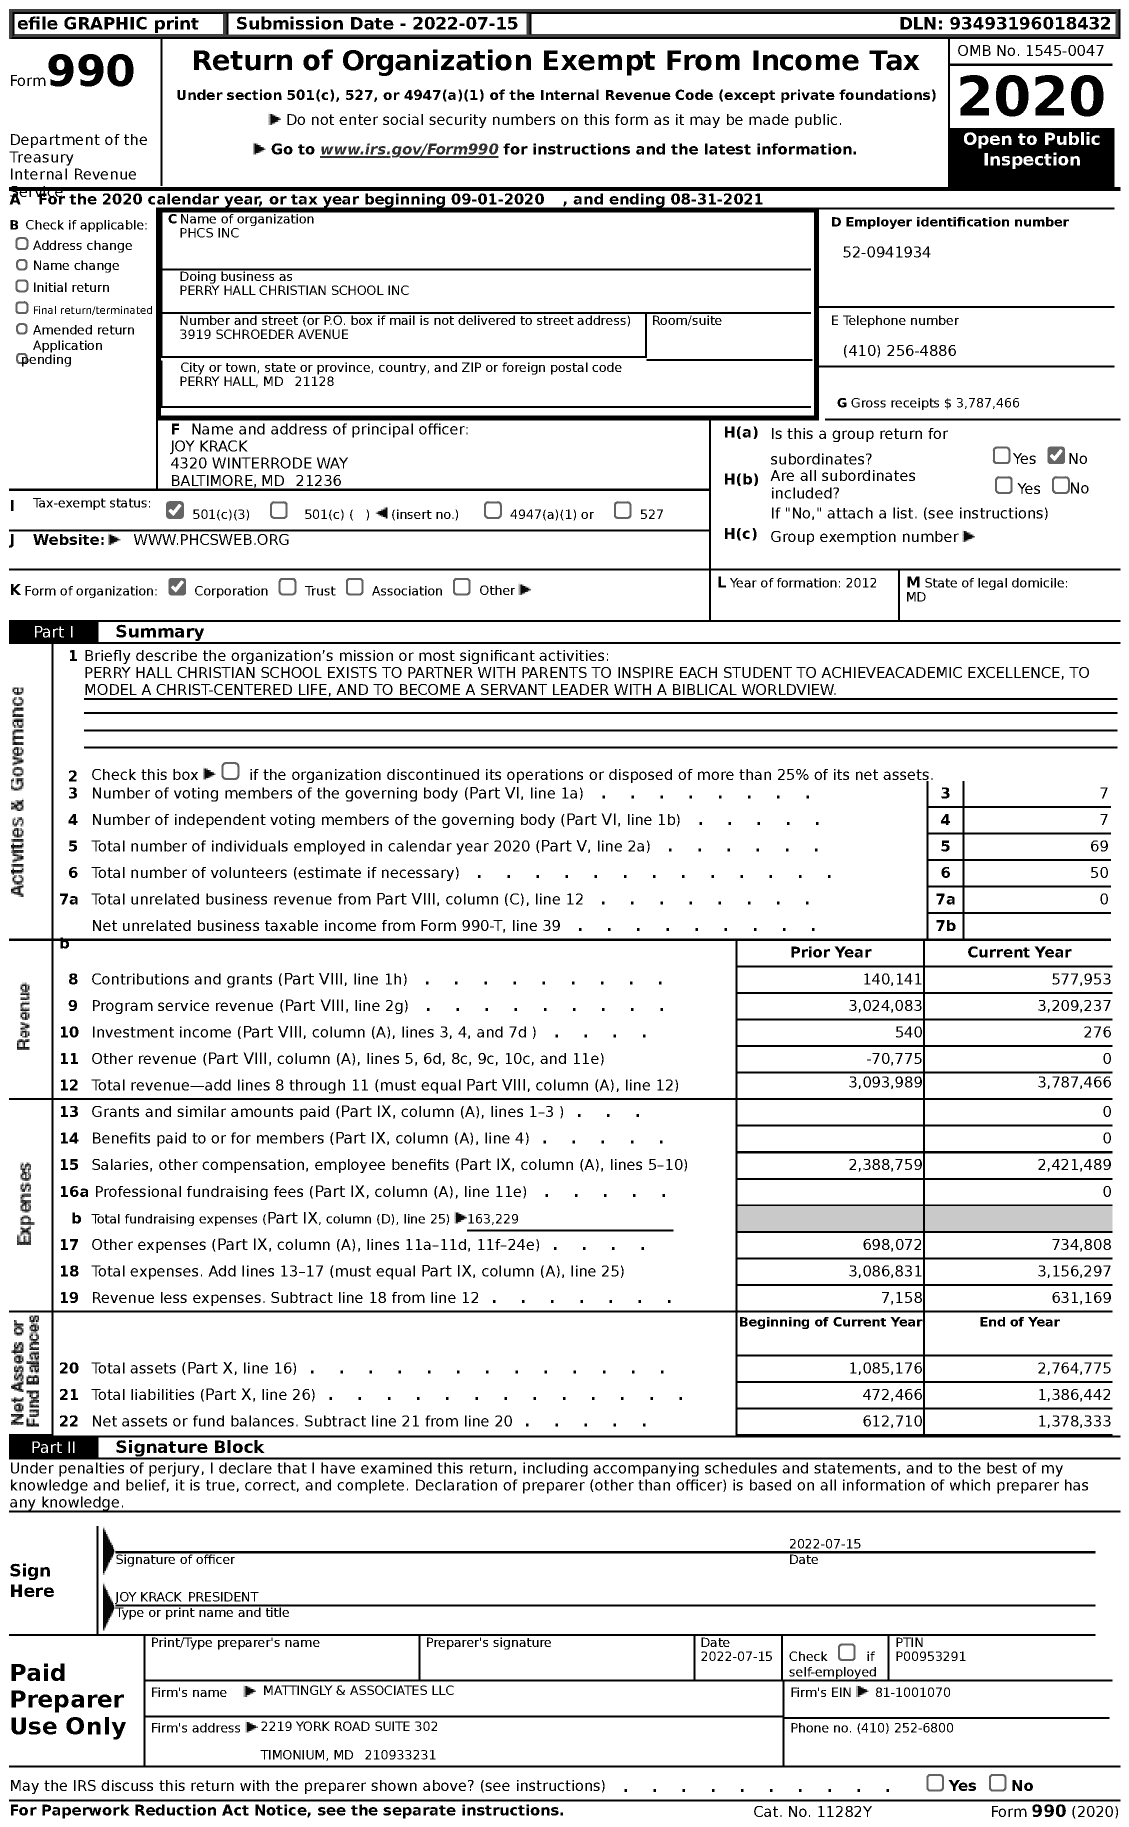 Image of first page of 2020 Form 990 for Perry Hall Christian School (PHCS)